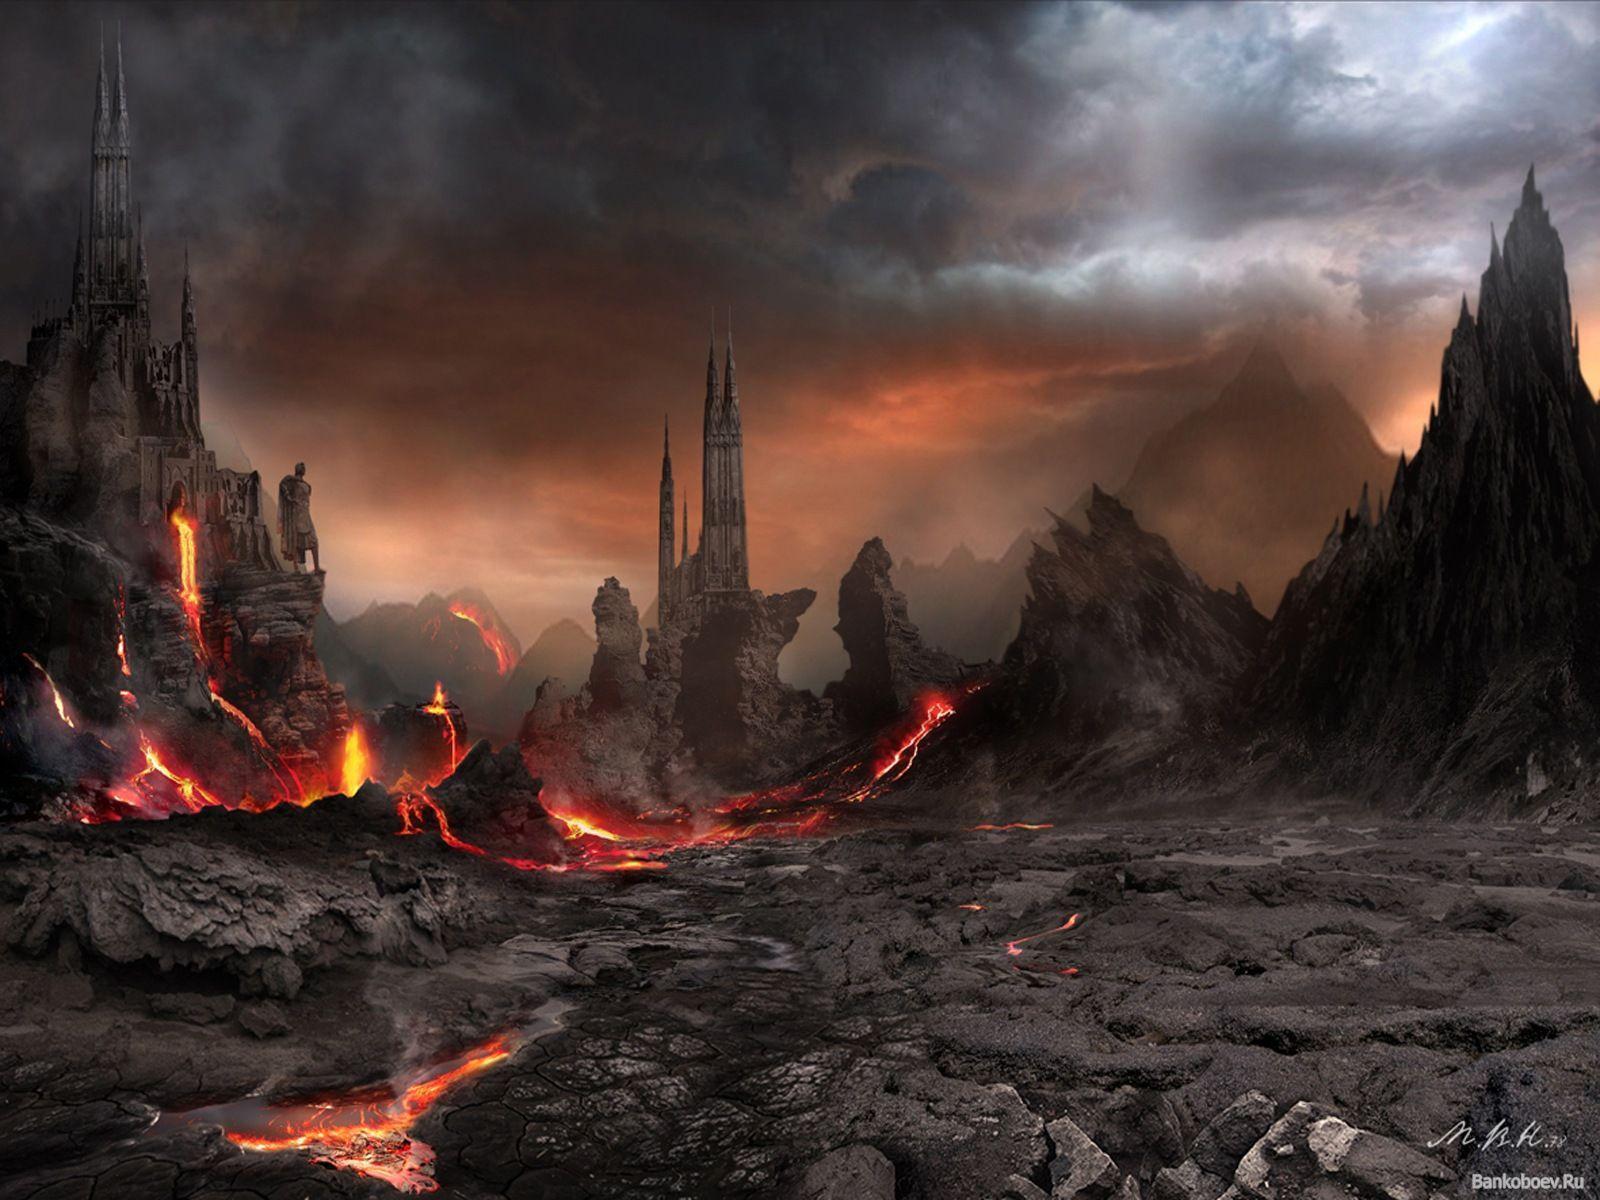 Download Mordor wallpapers for mobile phone free Mordor HD pictures